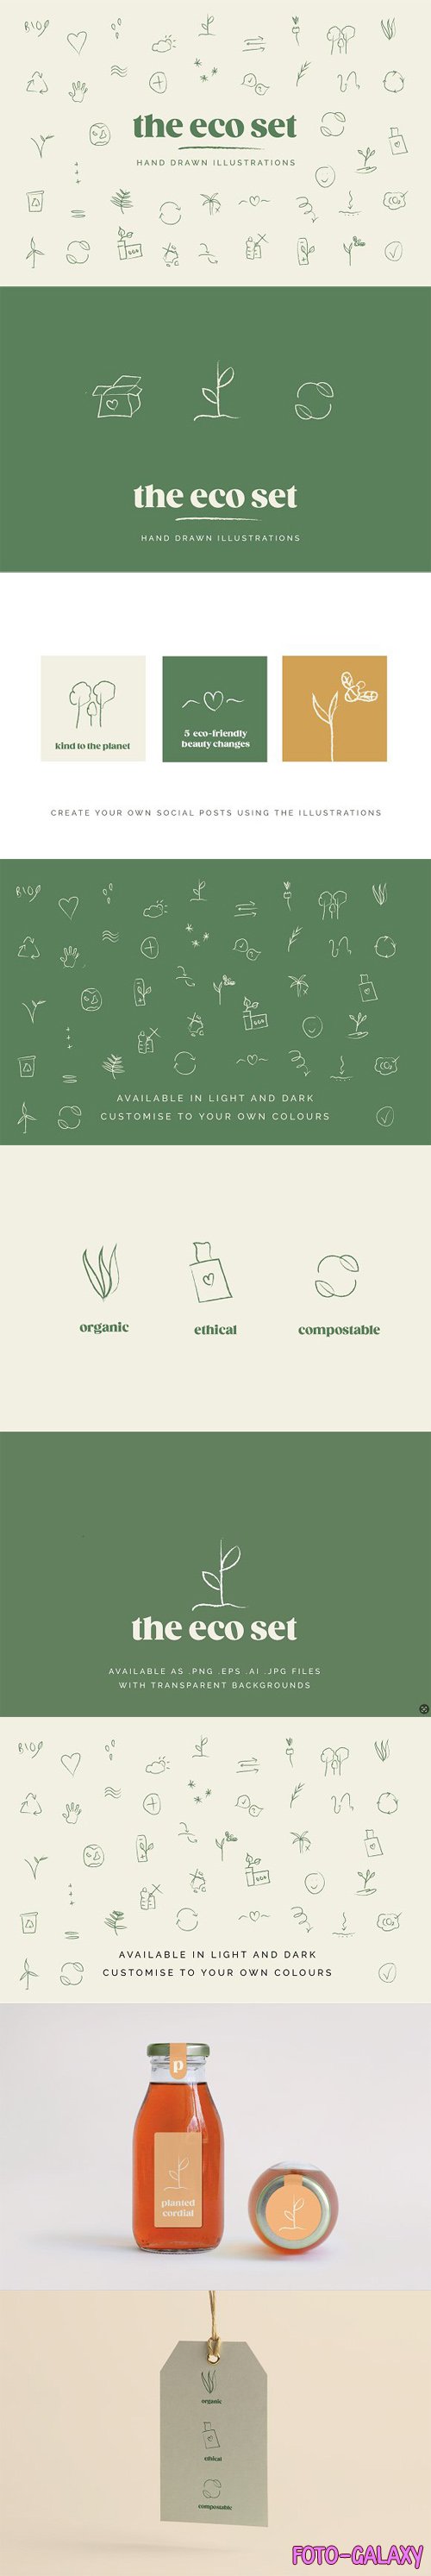 The Green Eco Set Icons - Hand Drawn Illustrations